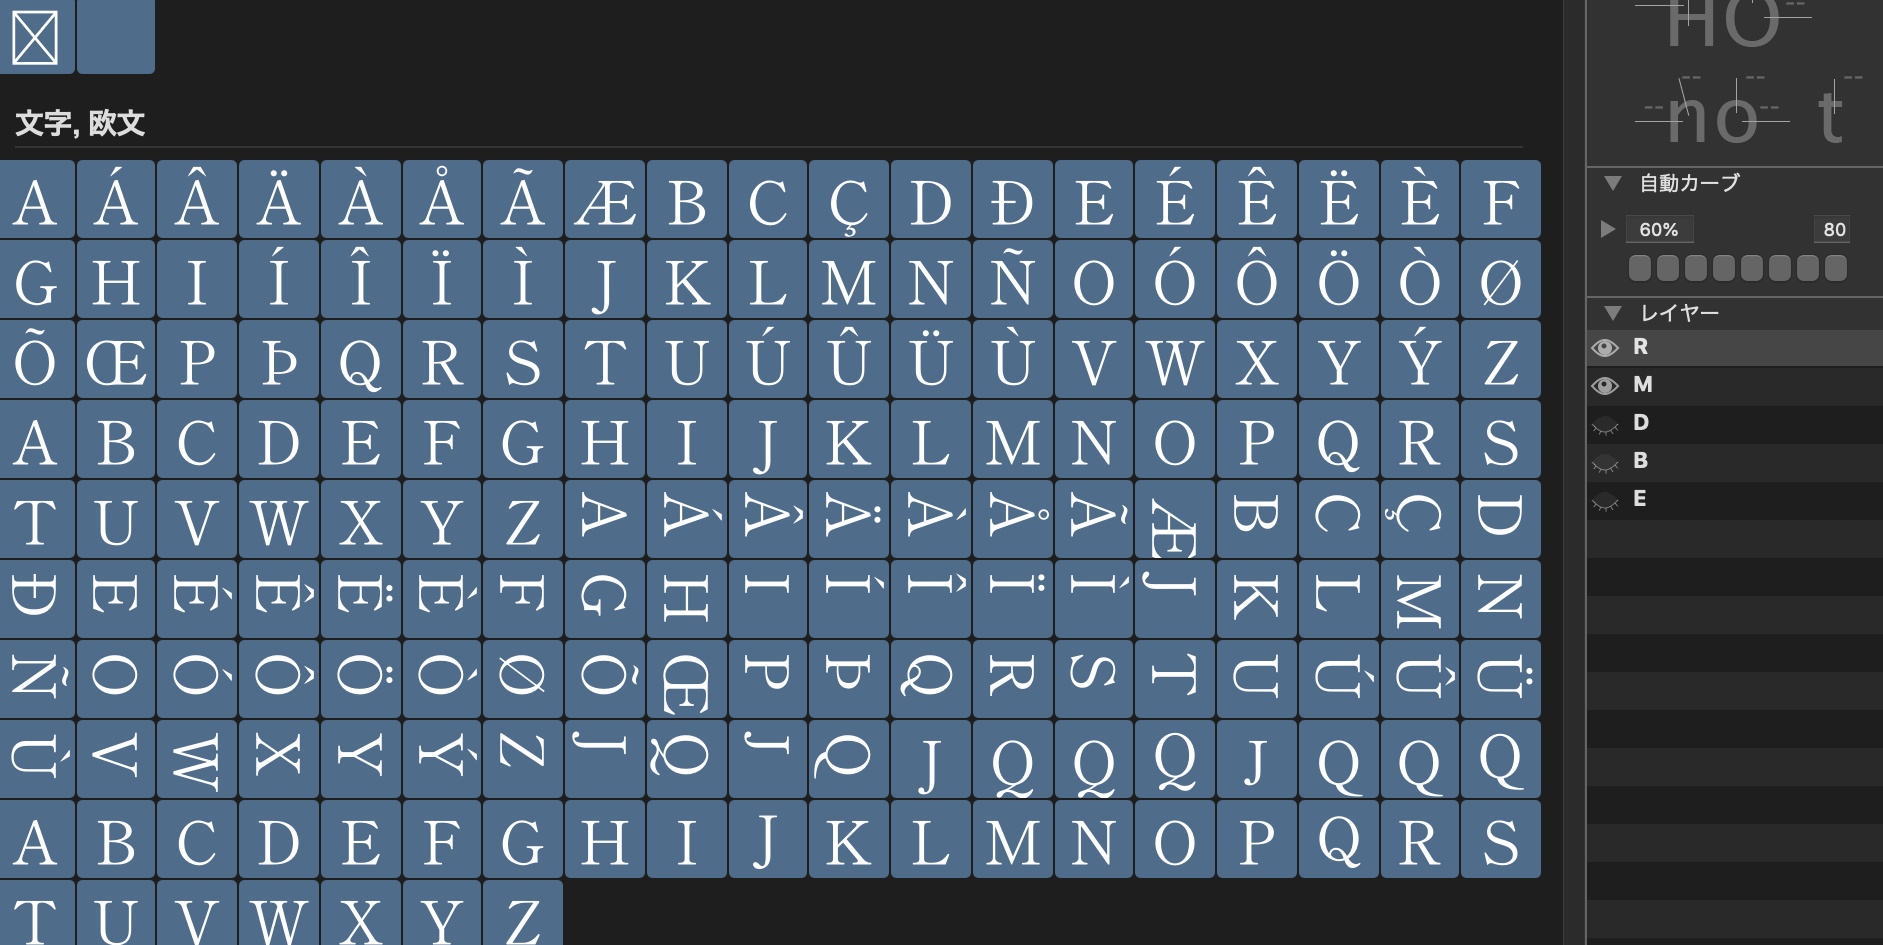 I Want To Erase Unused Layers From All Glyphs Glyphs Forum